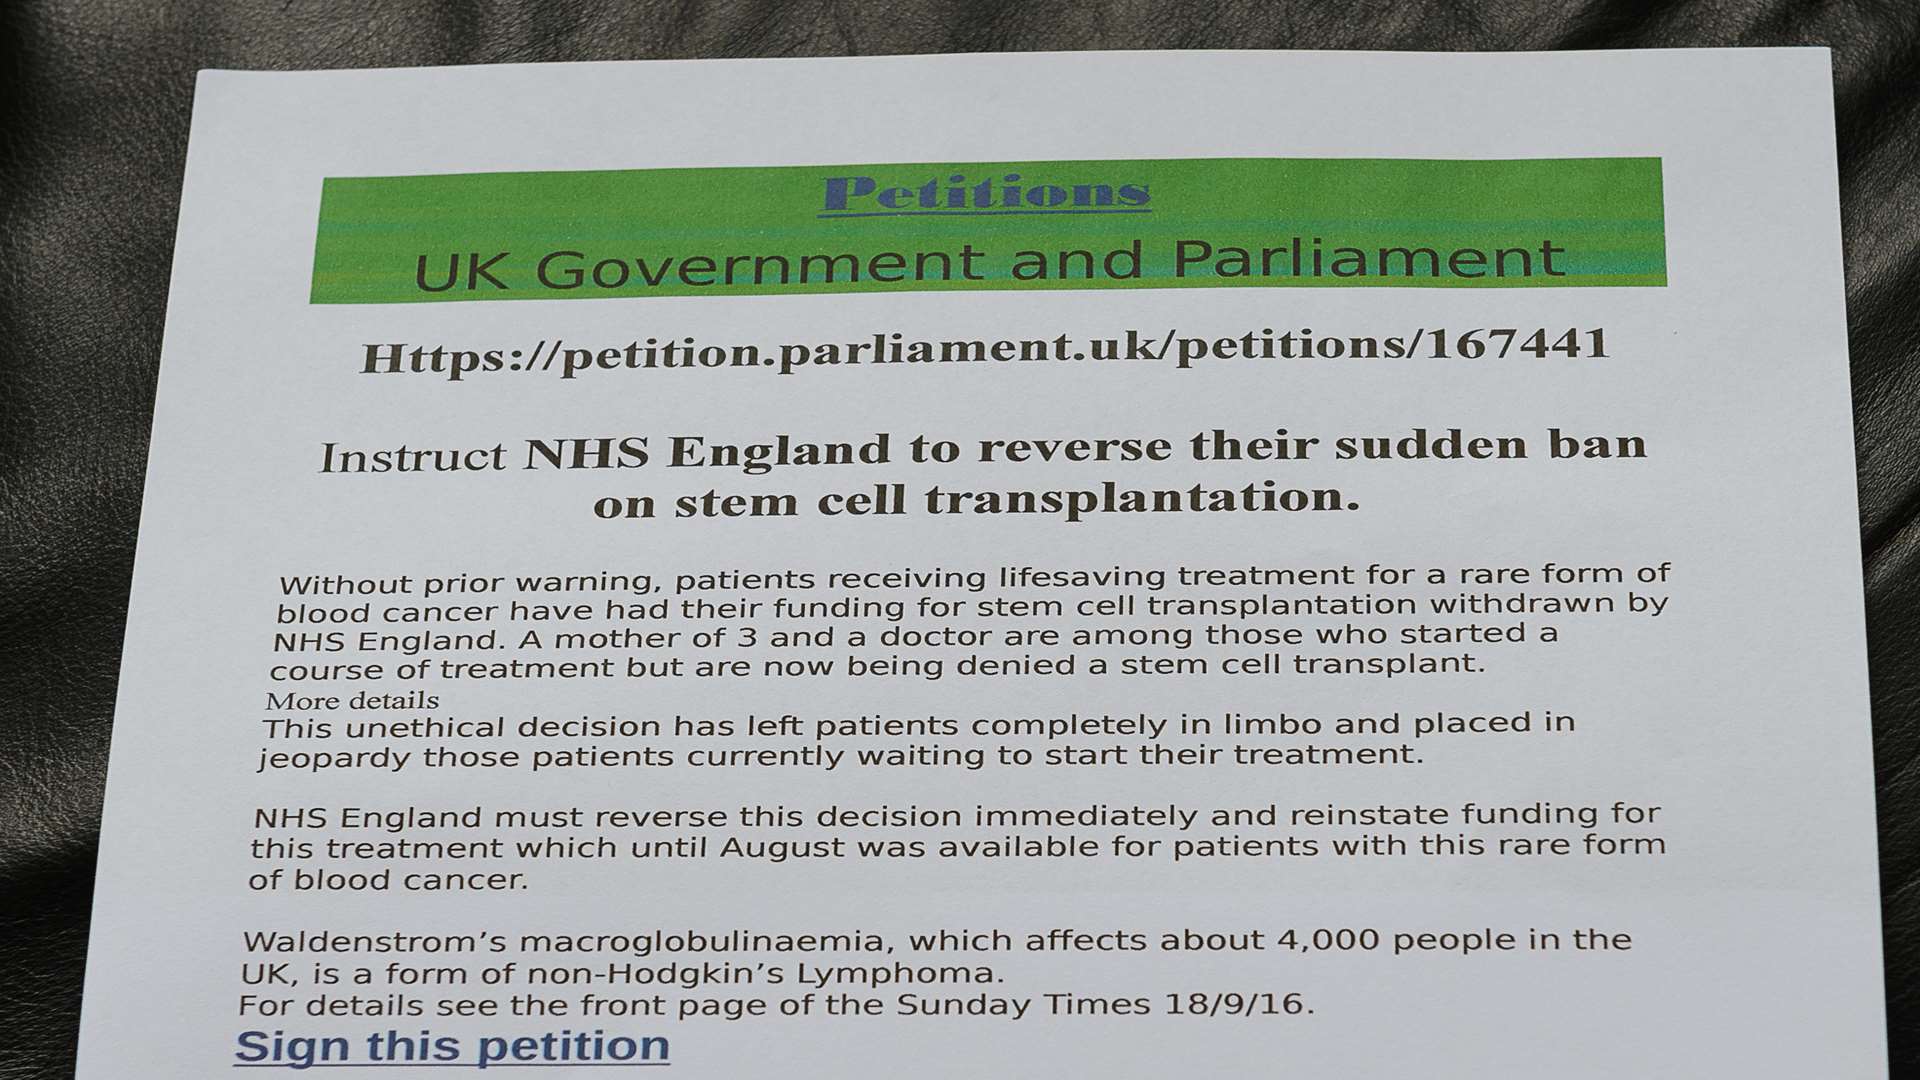 Copy of petition against the withdrawal of funding for stem cell transplantation by NHS England